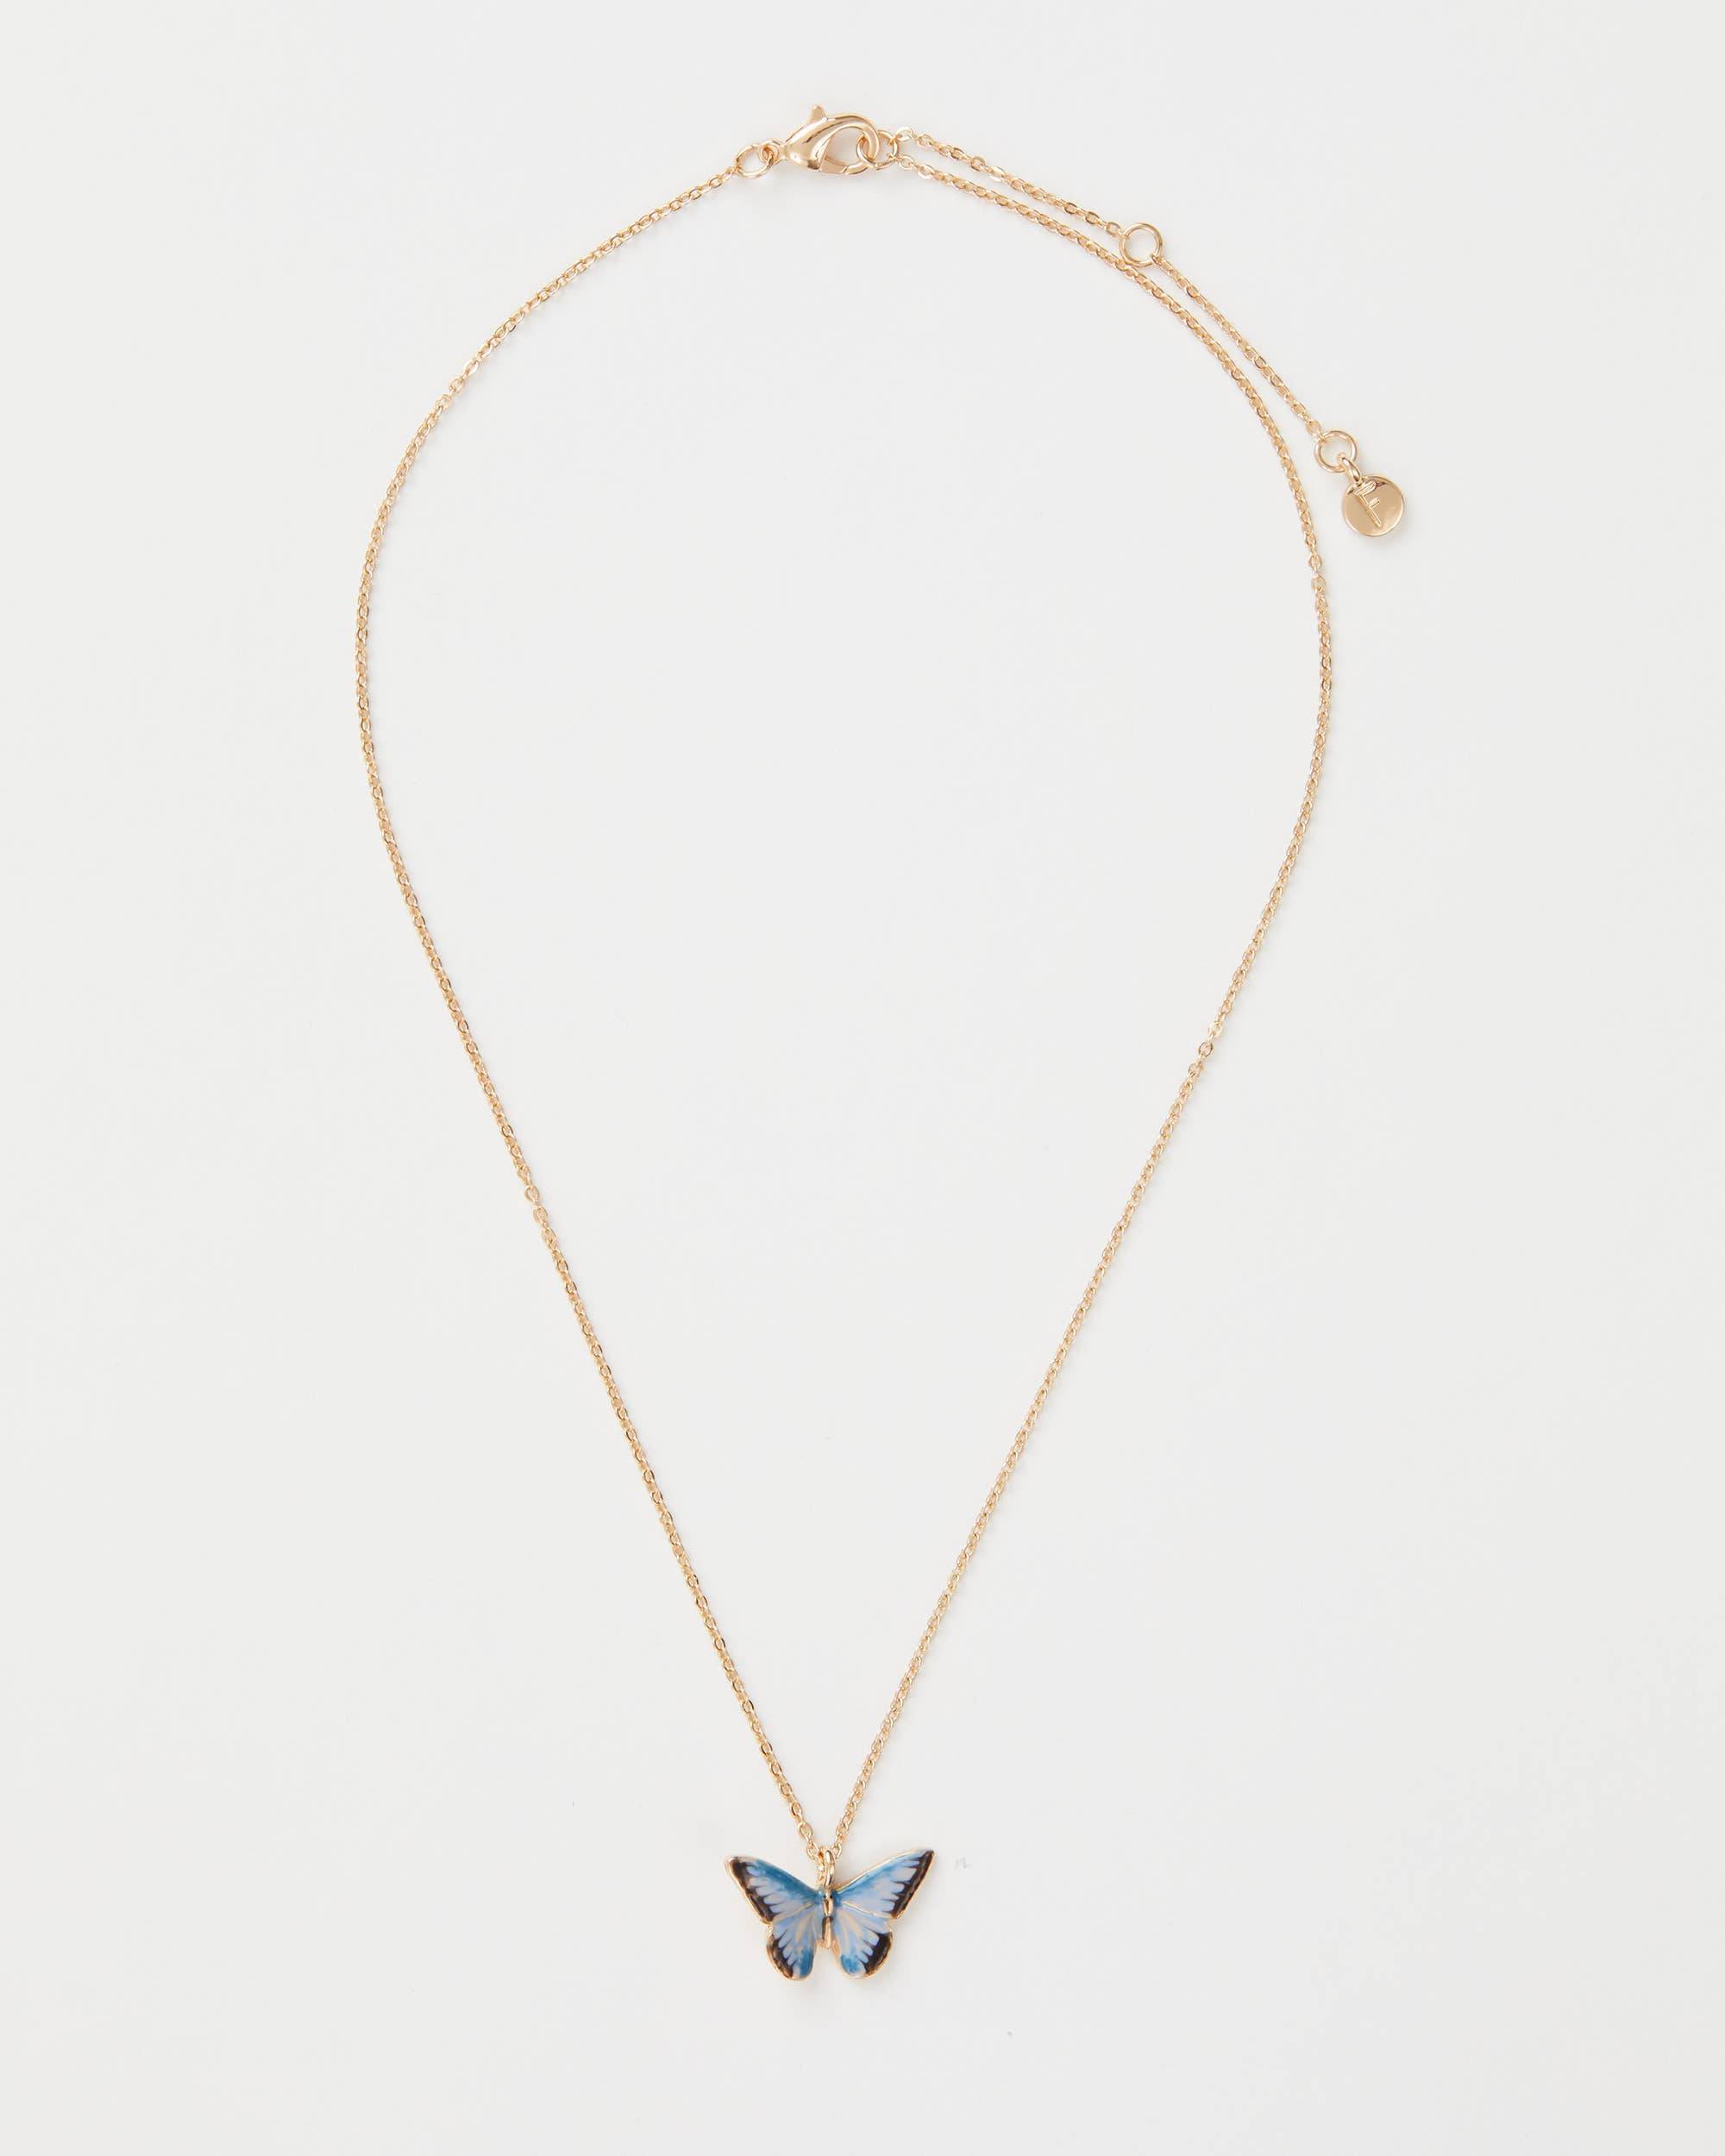 Enamel Blue Butterfly Short Necklace - Out of the Blue